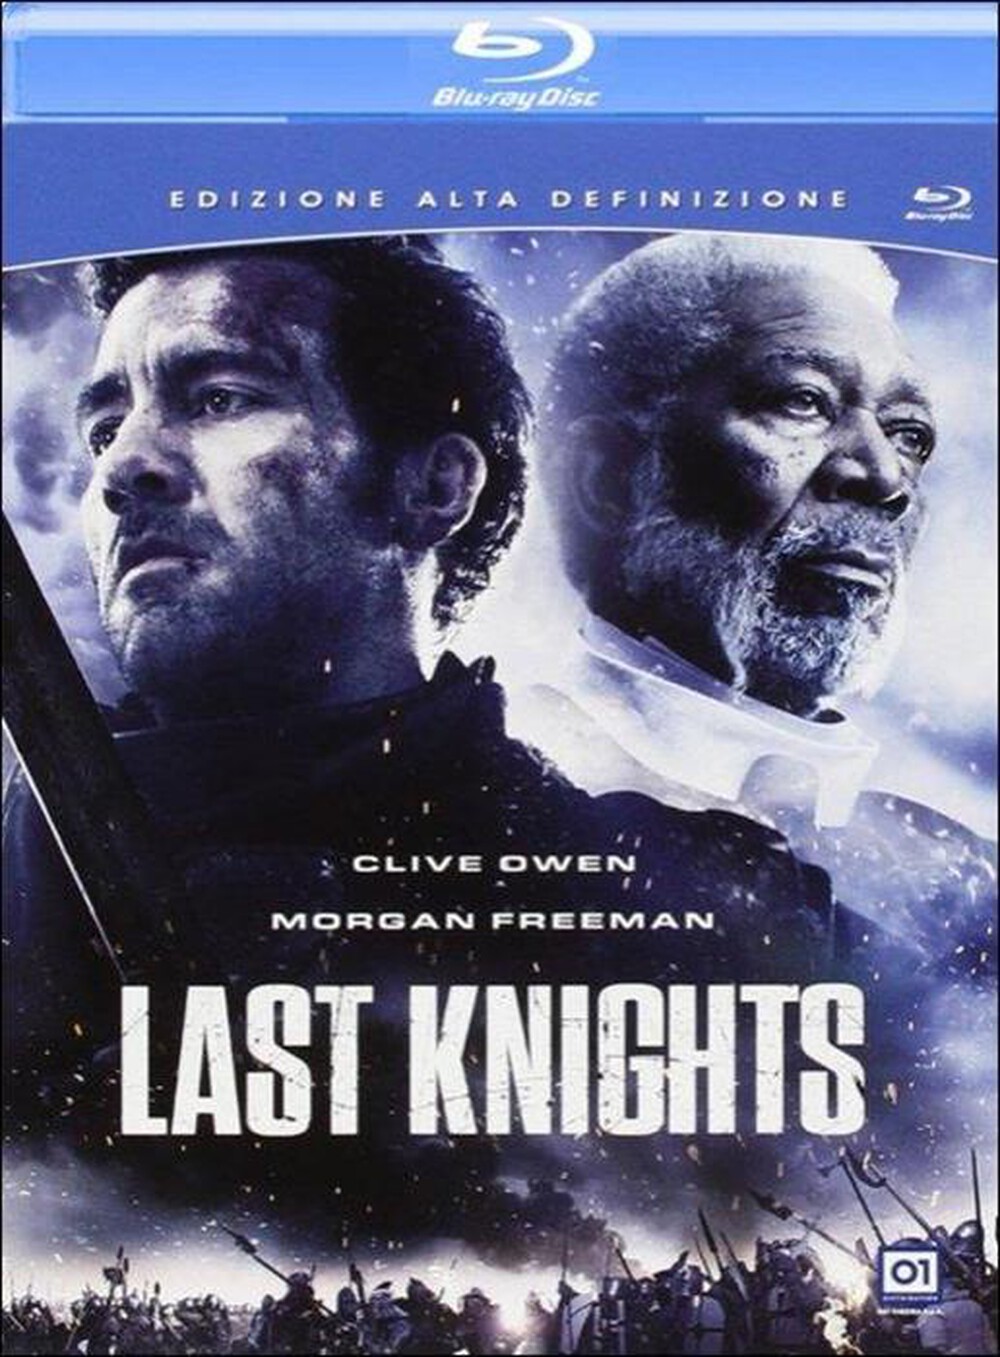 "EAGLE PICTURES - Last Knights"